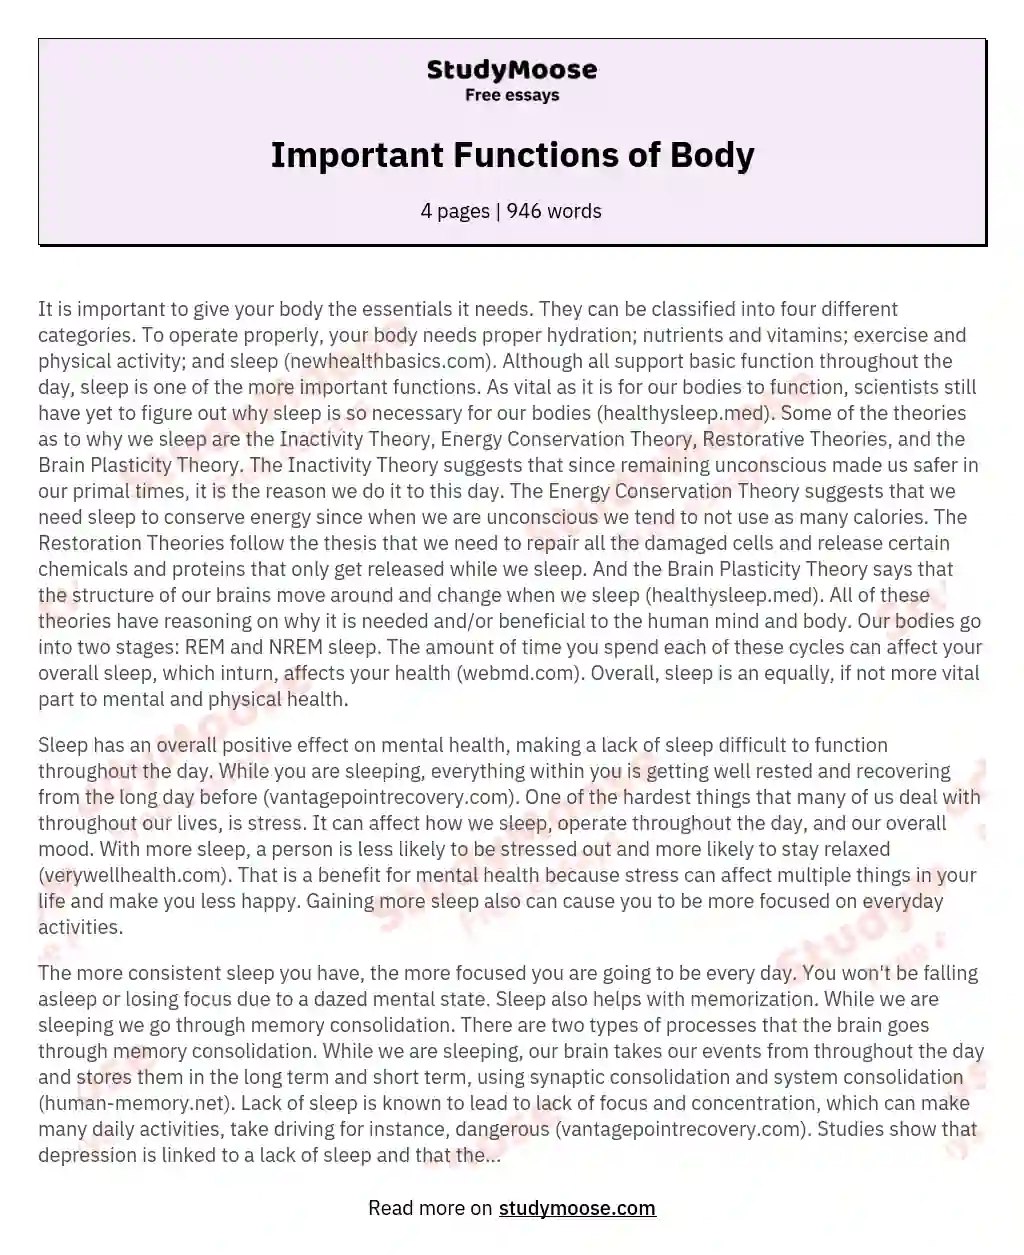 Important Functions of Body essay